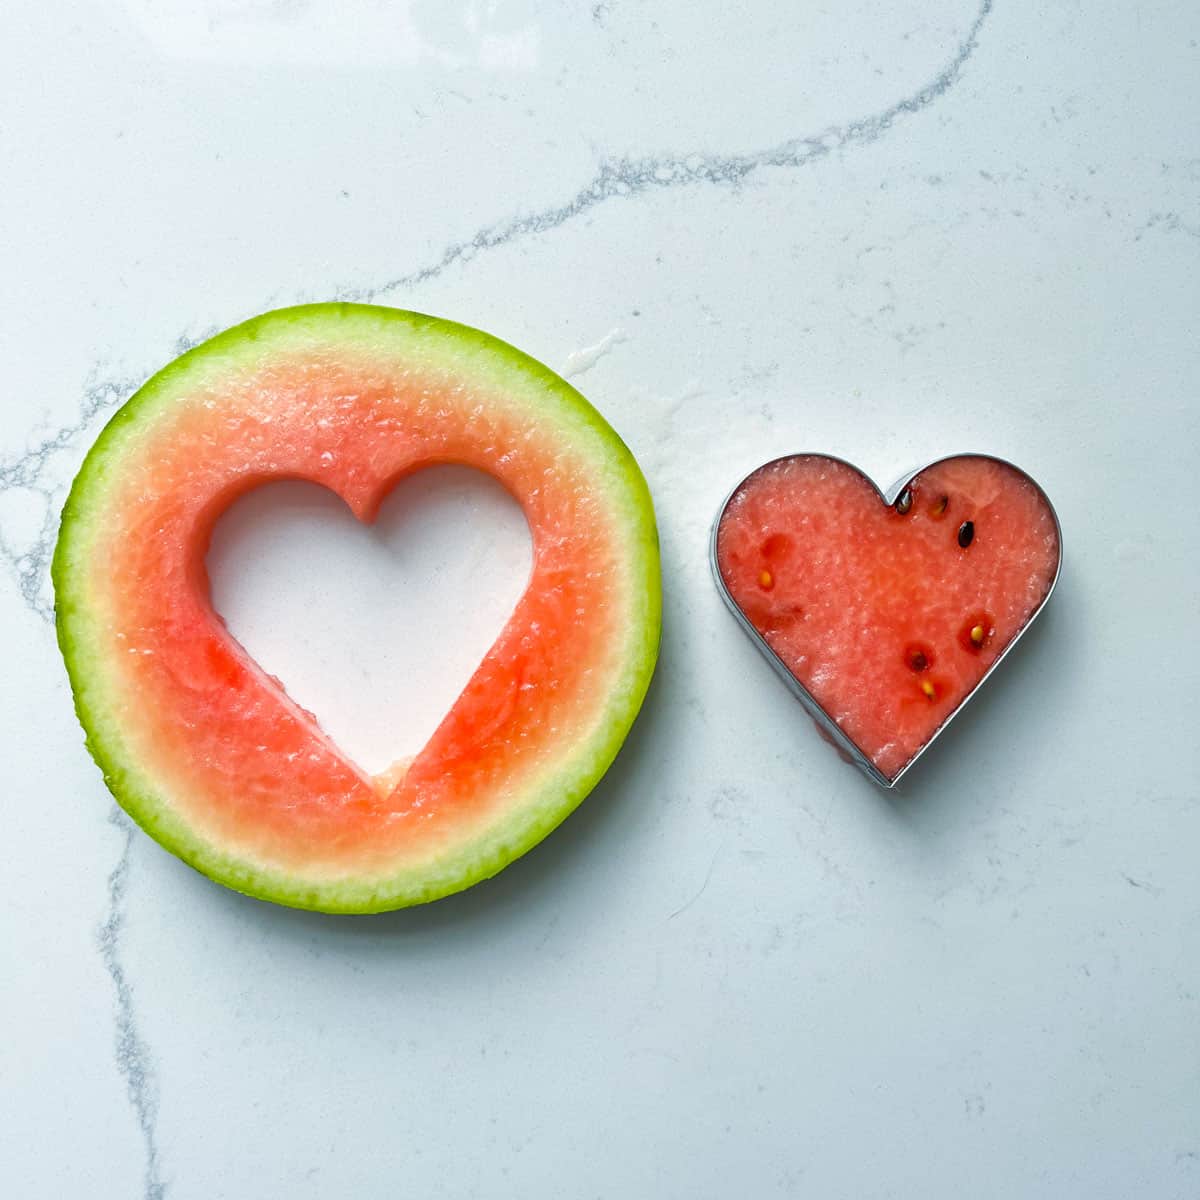 A heart shaped piece of watermelon cut from a larger piece of watermelon.